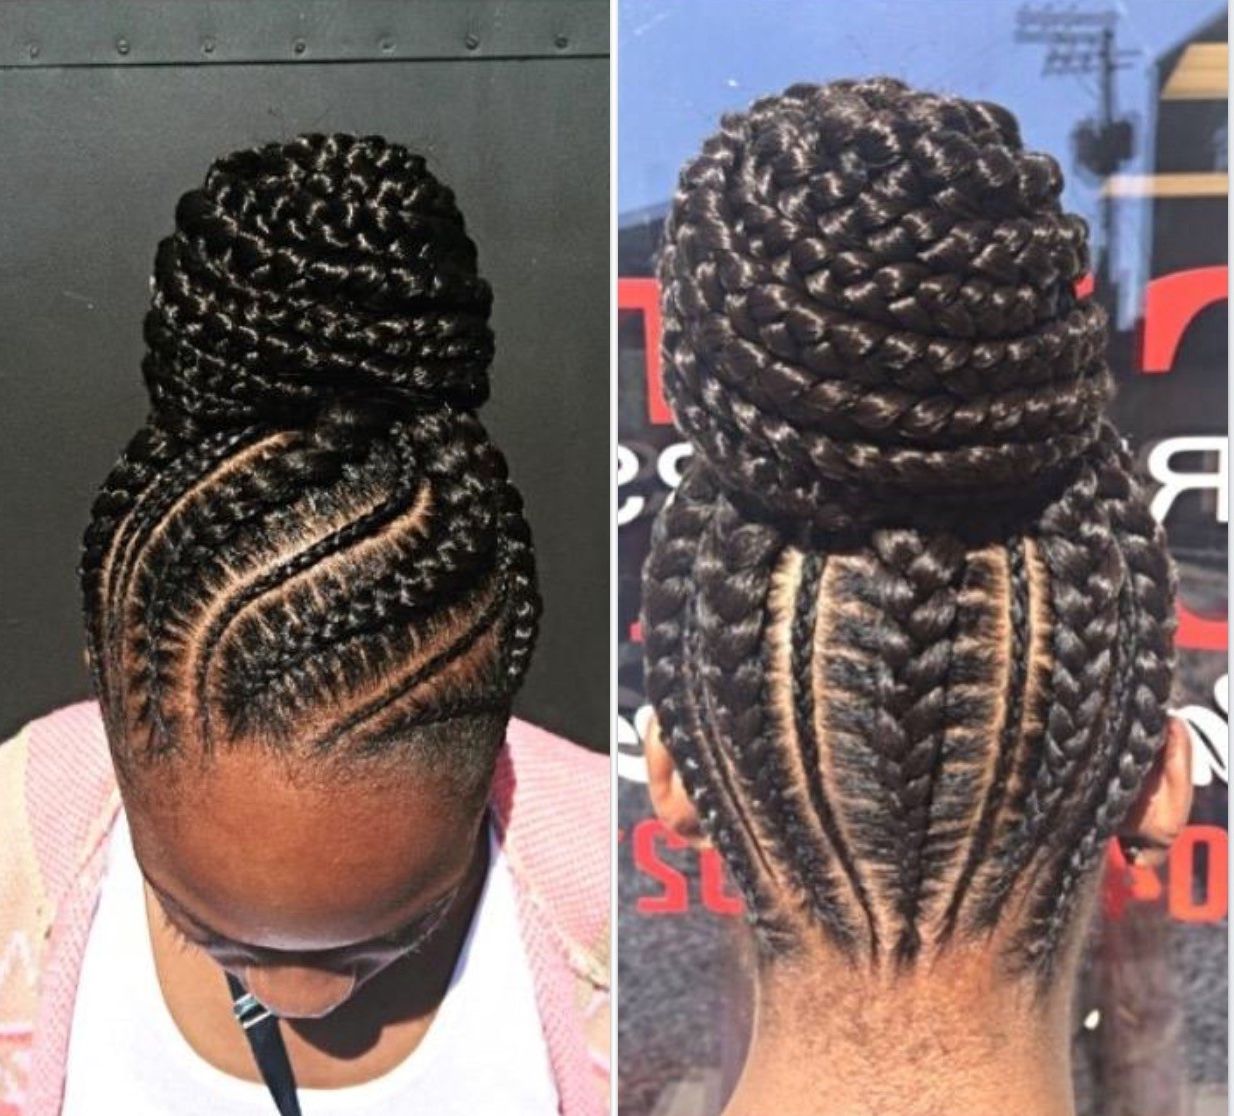 Current Ghana Braids Bun Hairstyles Inside Braided Bun Hairstyles With Extensions Lovely Image Result For Ghana (View 11 of 15)